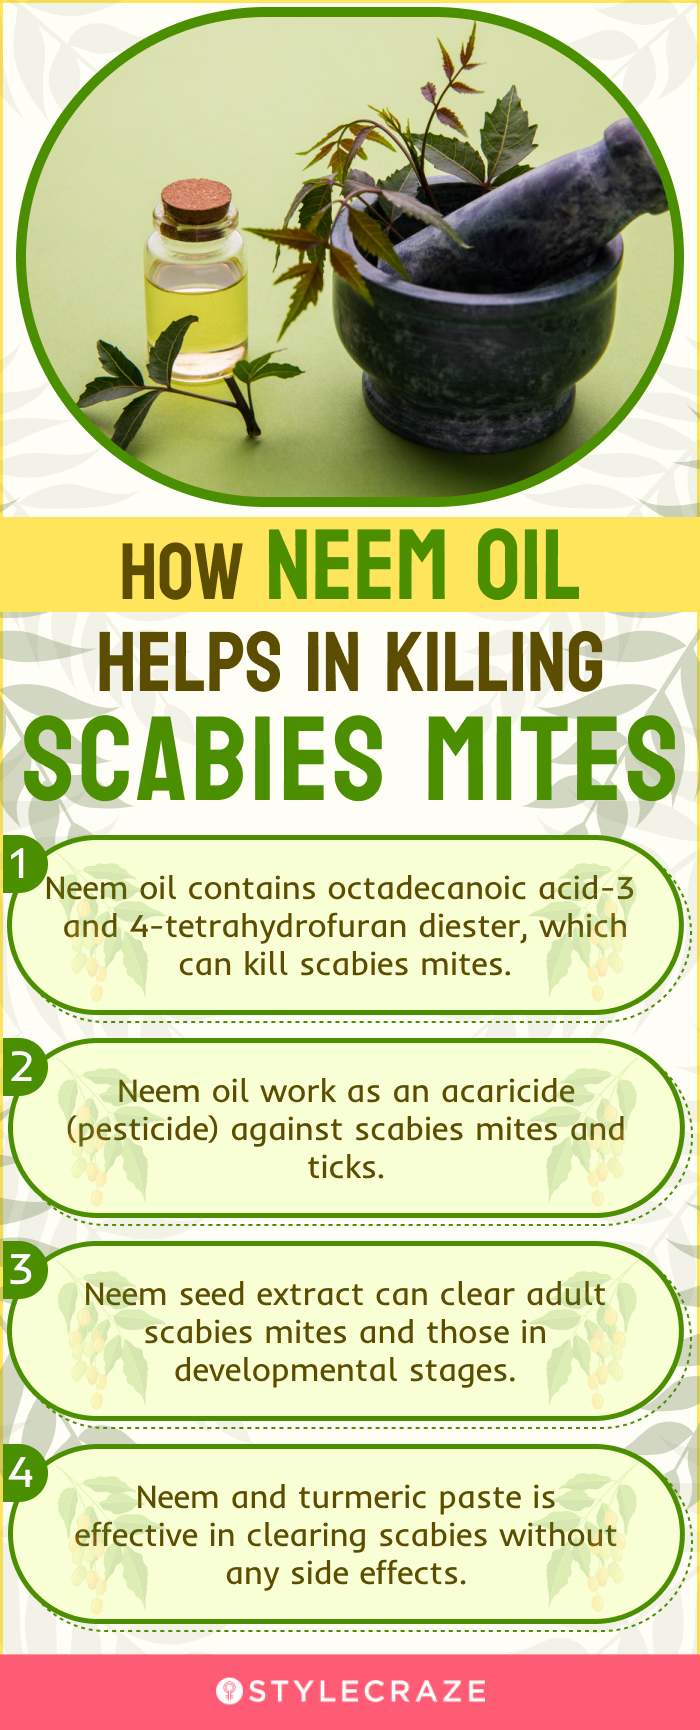 how neem oil helps in killing scabies mites [infographic]